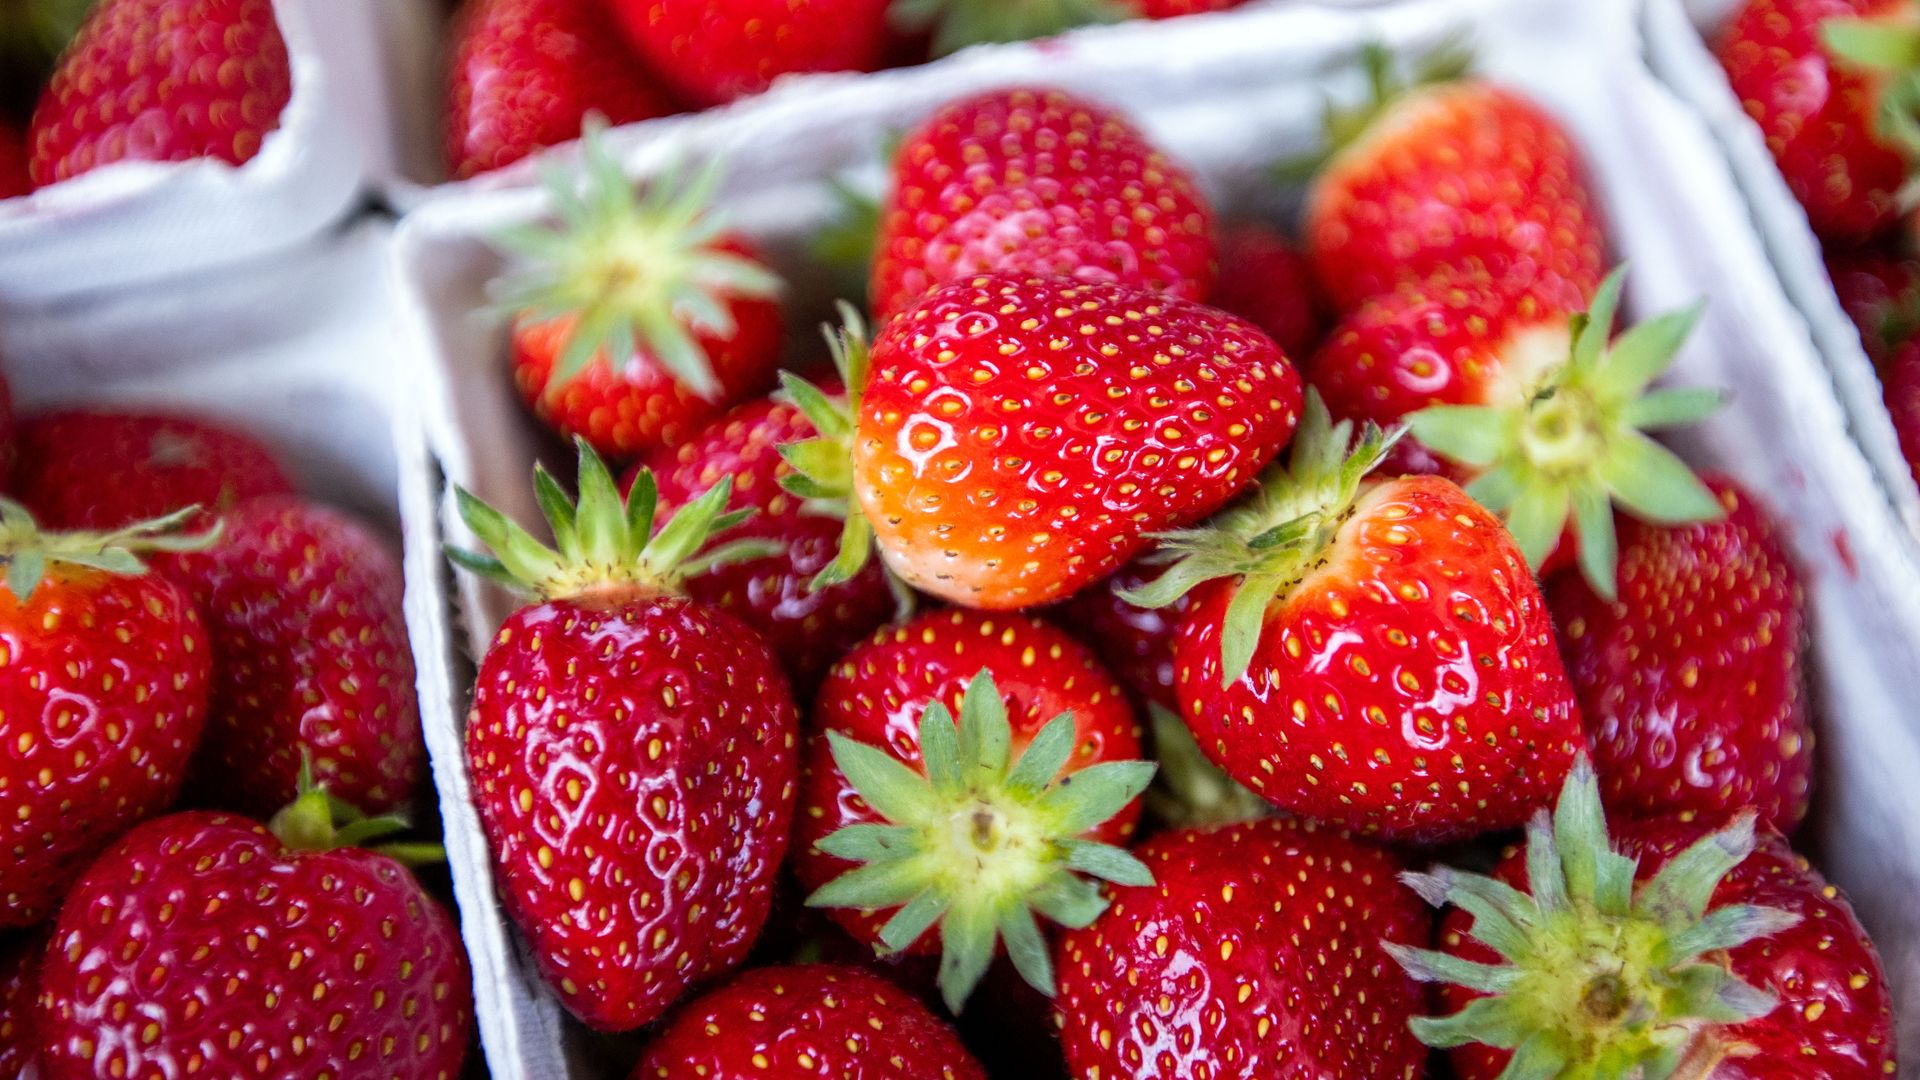 A close up of strawberries in a carton